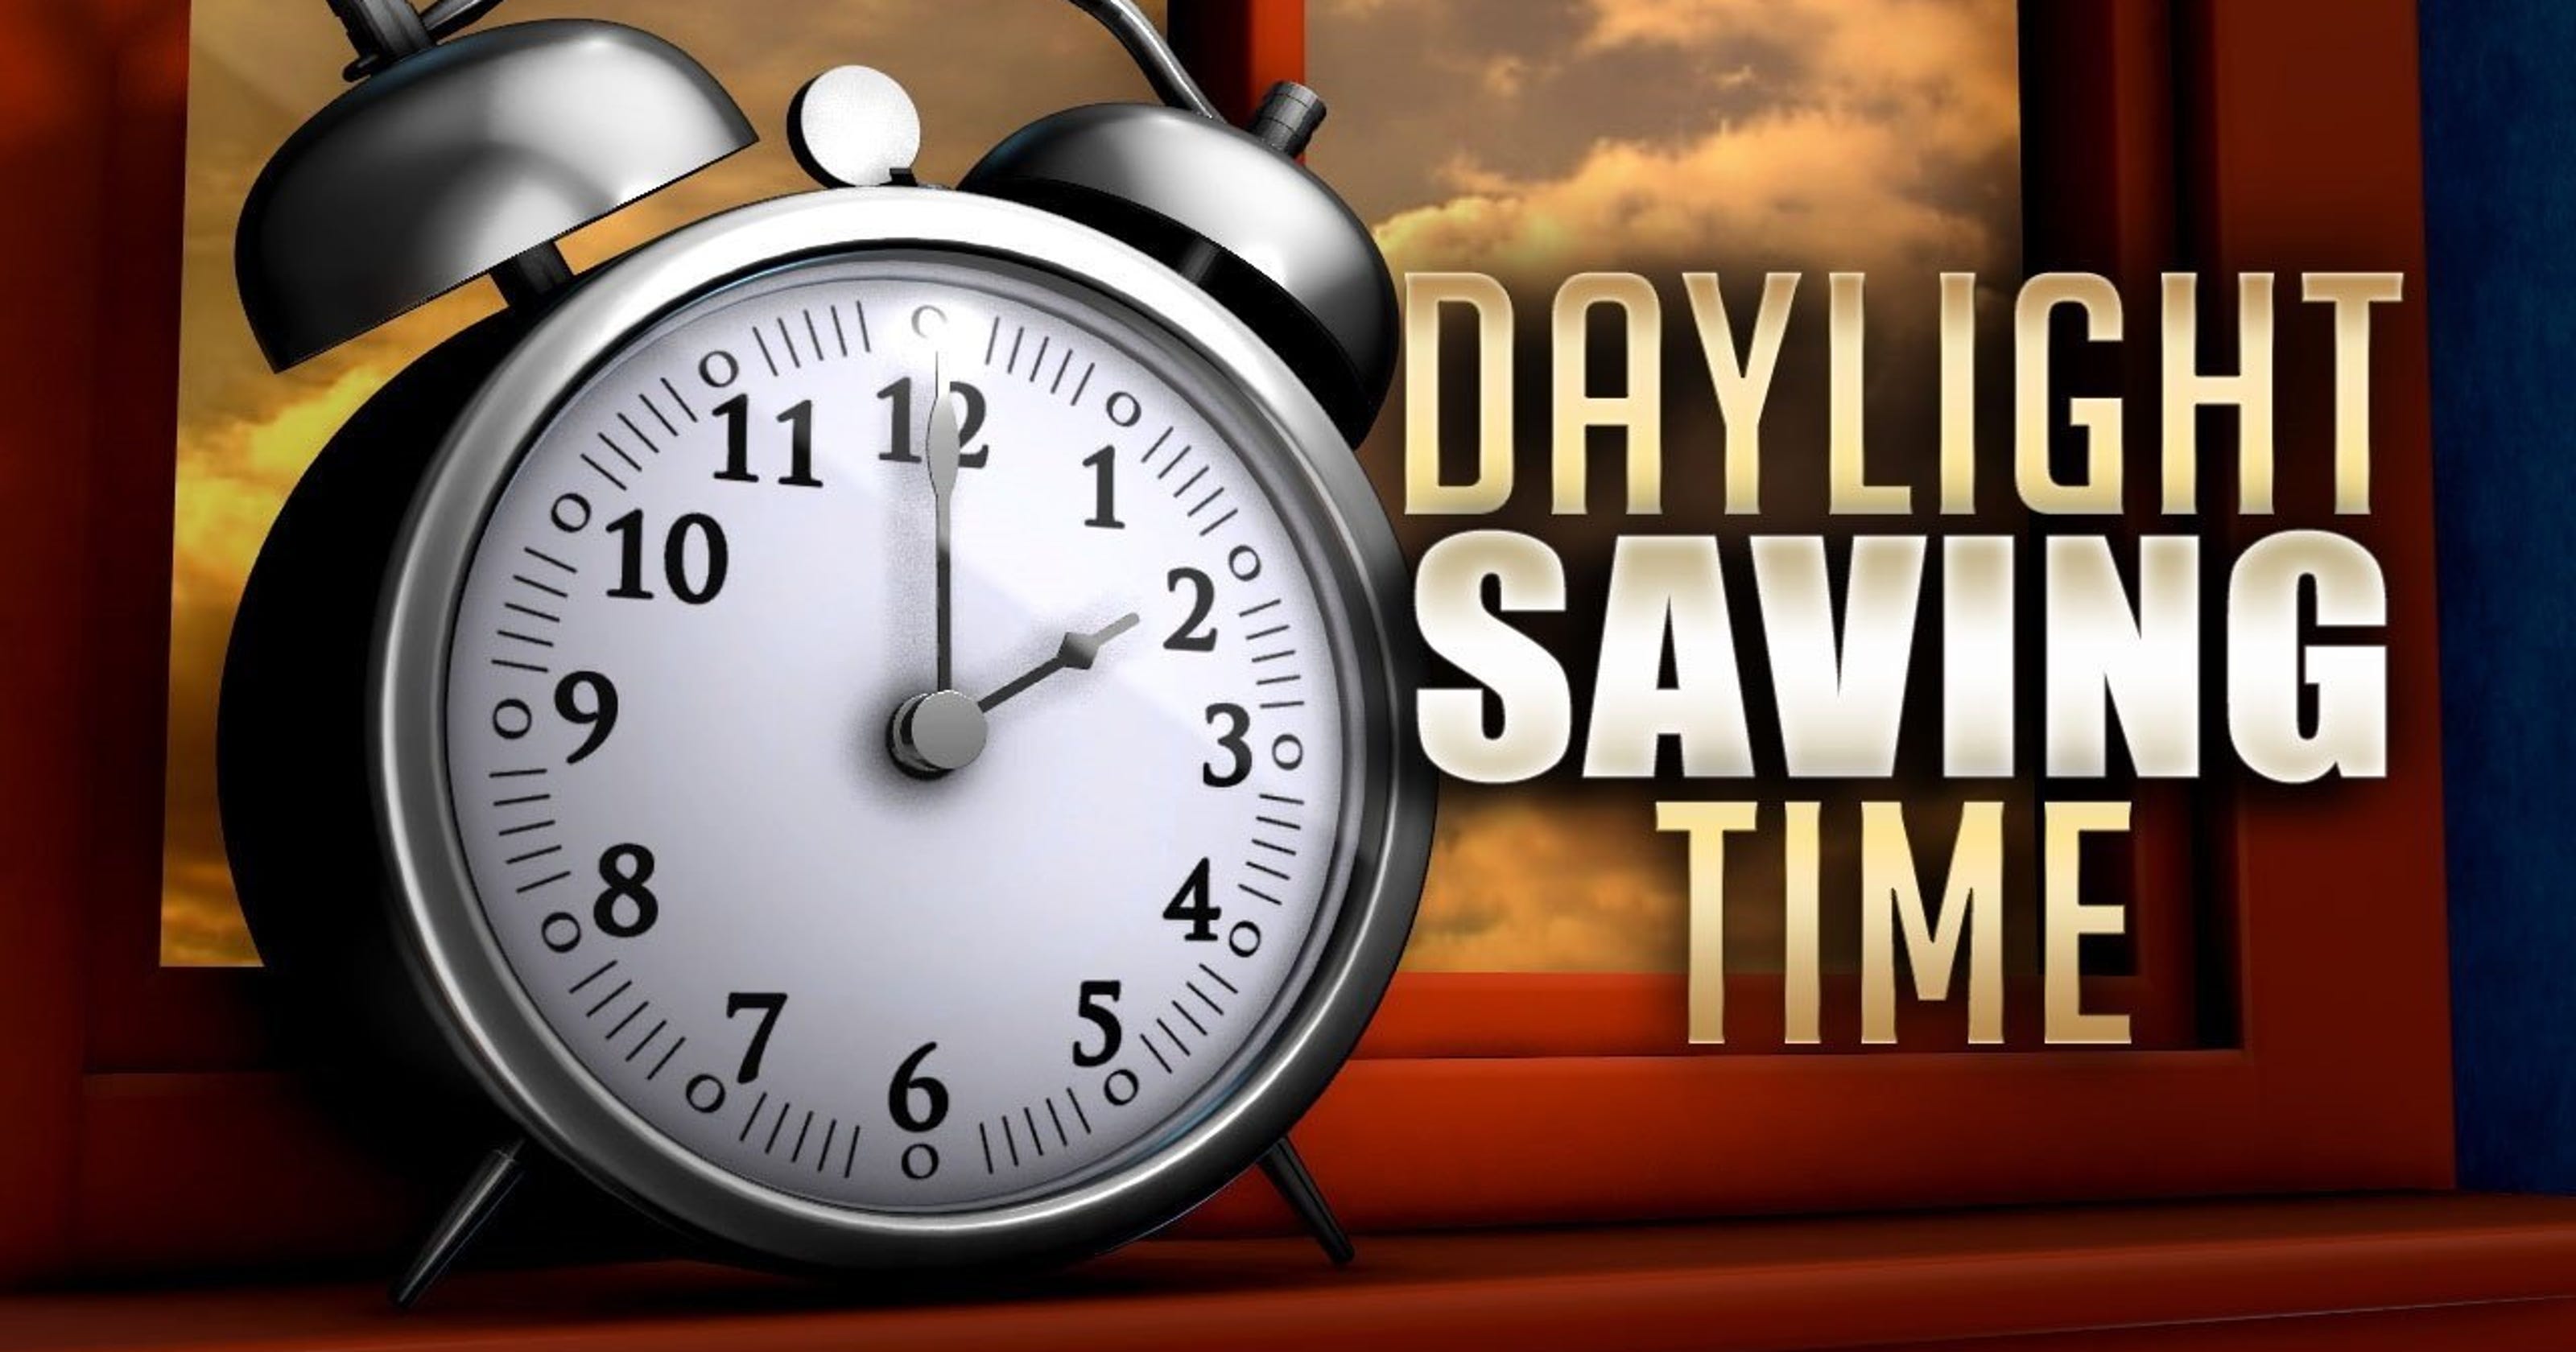 Is it Daylight Saving or Daylight Savings? And why do we bother?